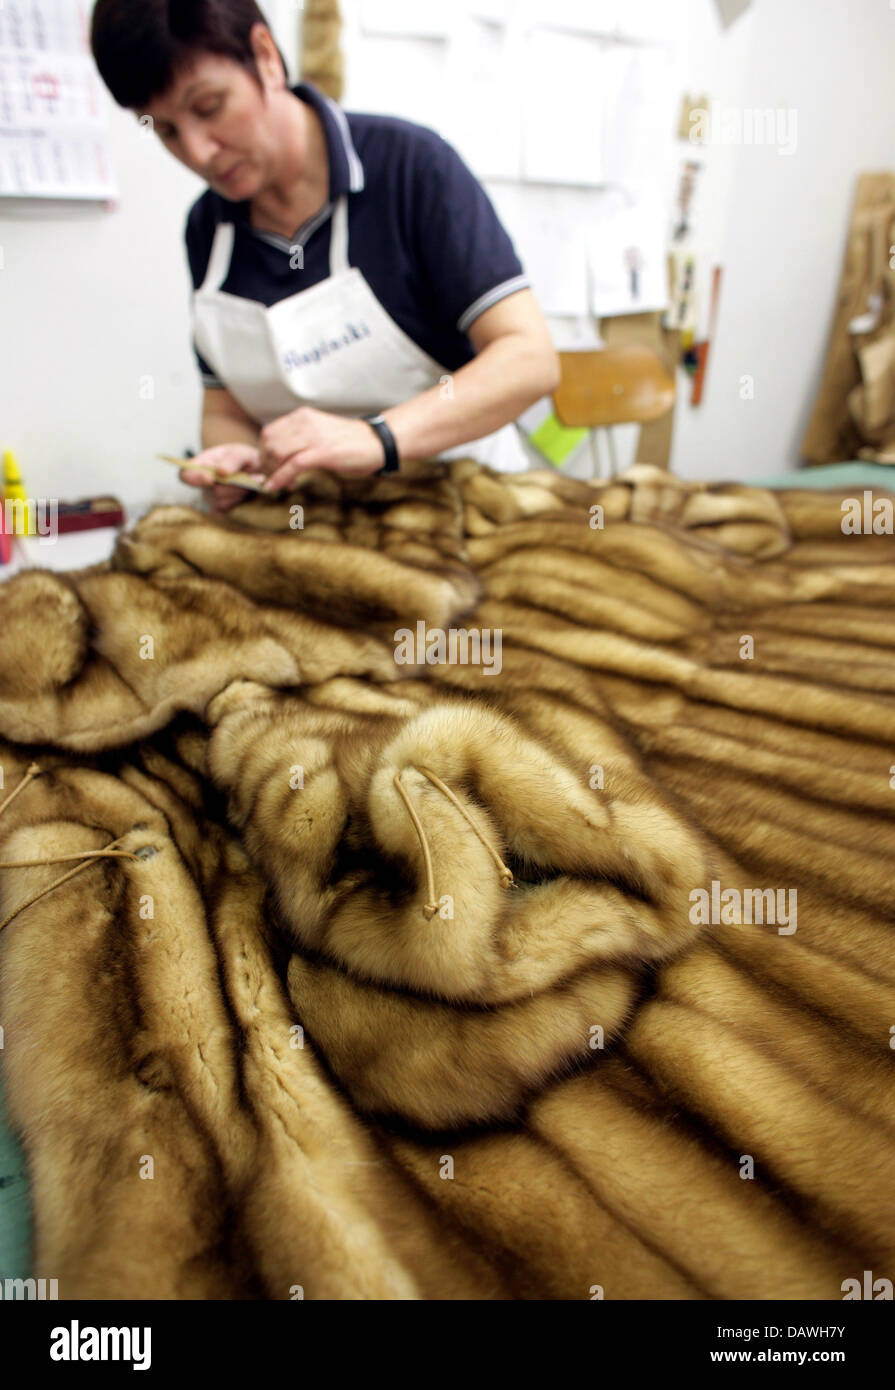 A staff member works on a sable fur in the 'Slupinski' fur fashion factory on Koenigsallee in Duesseldorf, Germany, 12 January 2007. The Slupinski brothers create individual items for their customers in Duesseldorf or St. Moritz. Photo: Rolf Vennenbernd Stock Photo